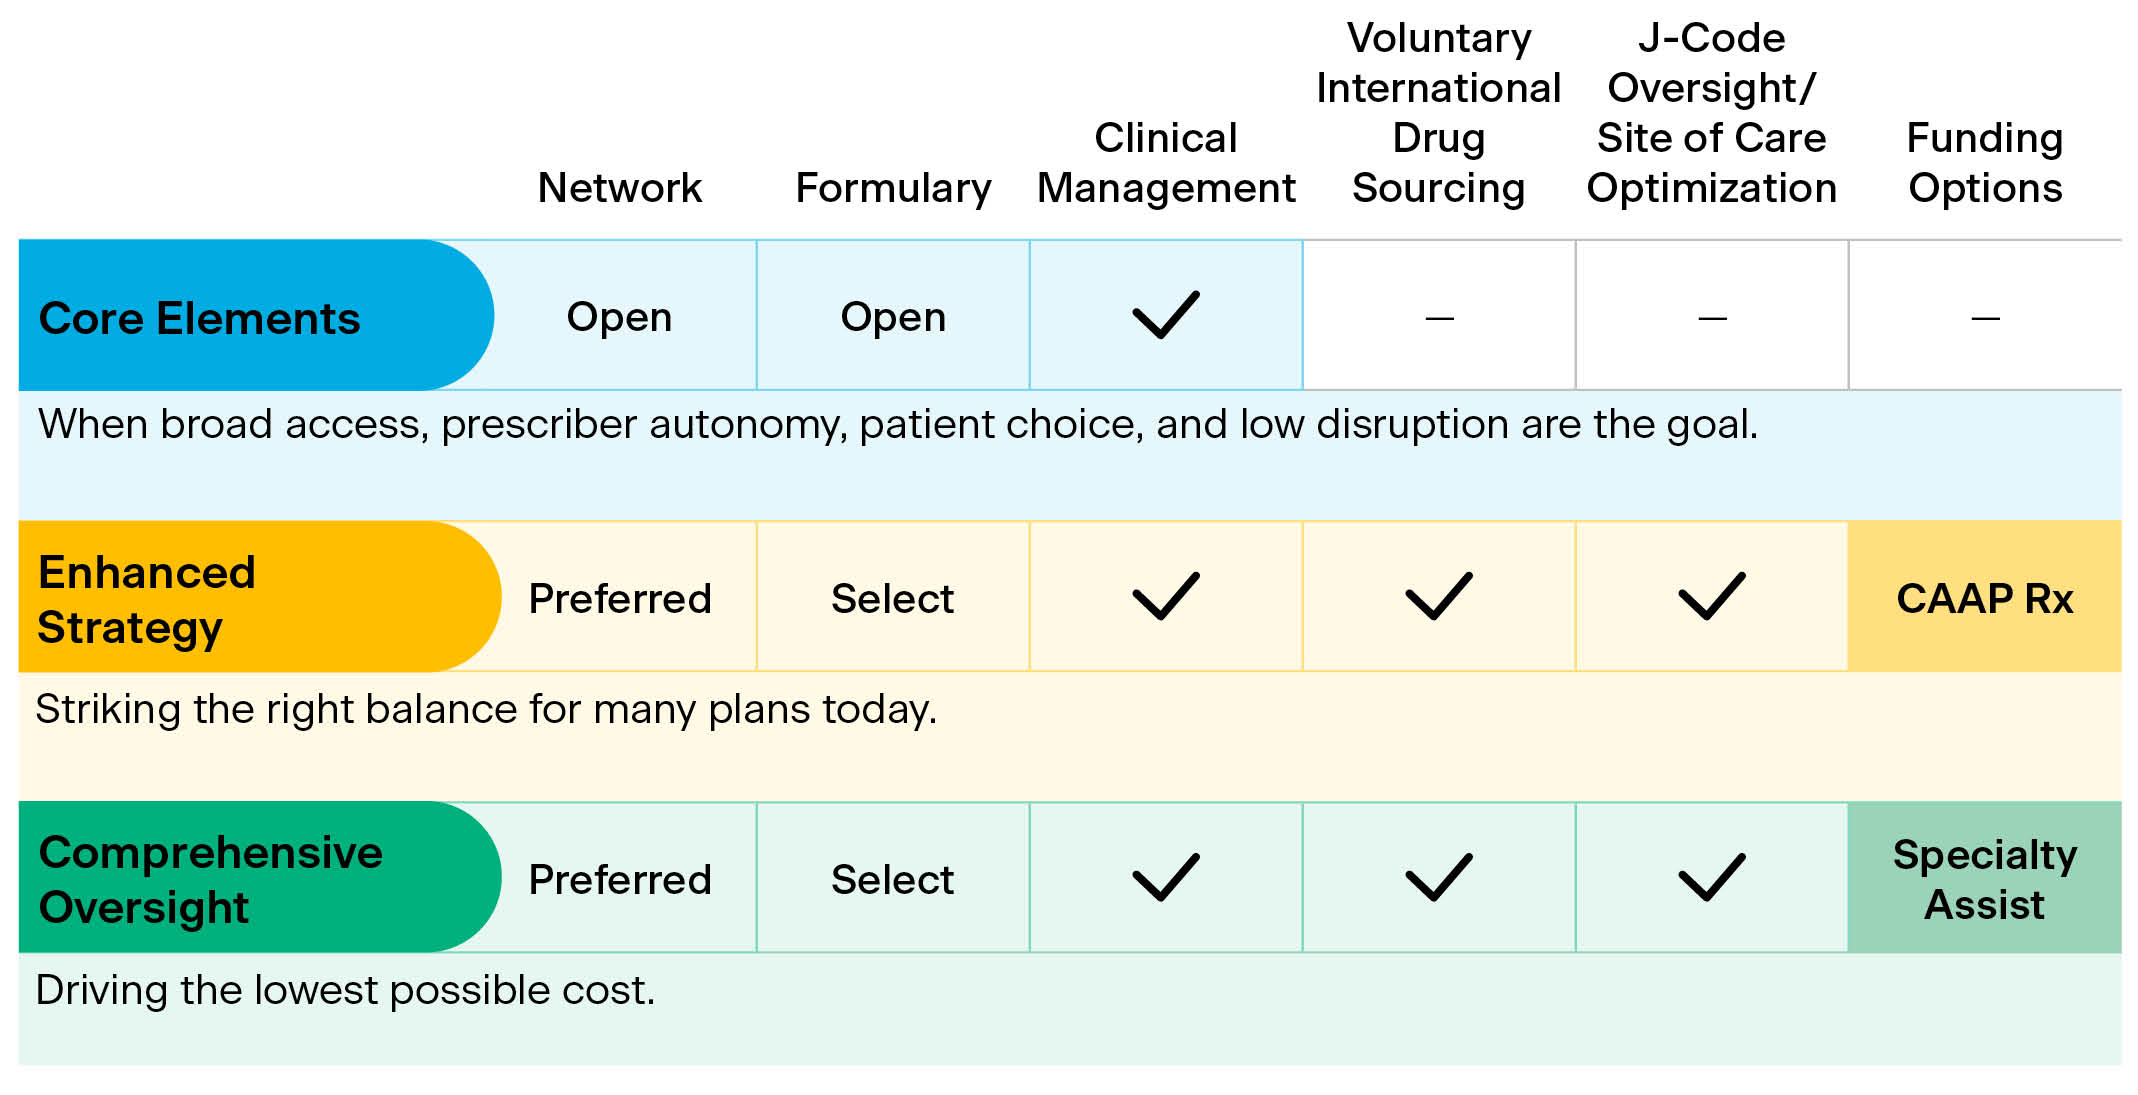 The table suggests a tiered approach to specialty medications management, starting from broad access with minimal oversight ("Core Elements") to more controlled and cost-effective strategies ("Comprehensive Oversight"). Each strategy is designed to meet different client needs and priorities, balancing member experience, outcomes, and financial considerations. It had three columns - core elements, enhances strategy, and comprehensive oversight. It has six rows - Network, formulary, clinical management, voluntary international drug sourcing, j-code oversight/site of care optimization, and funding options.